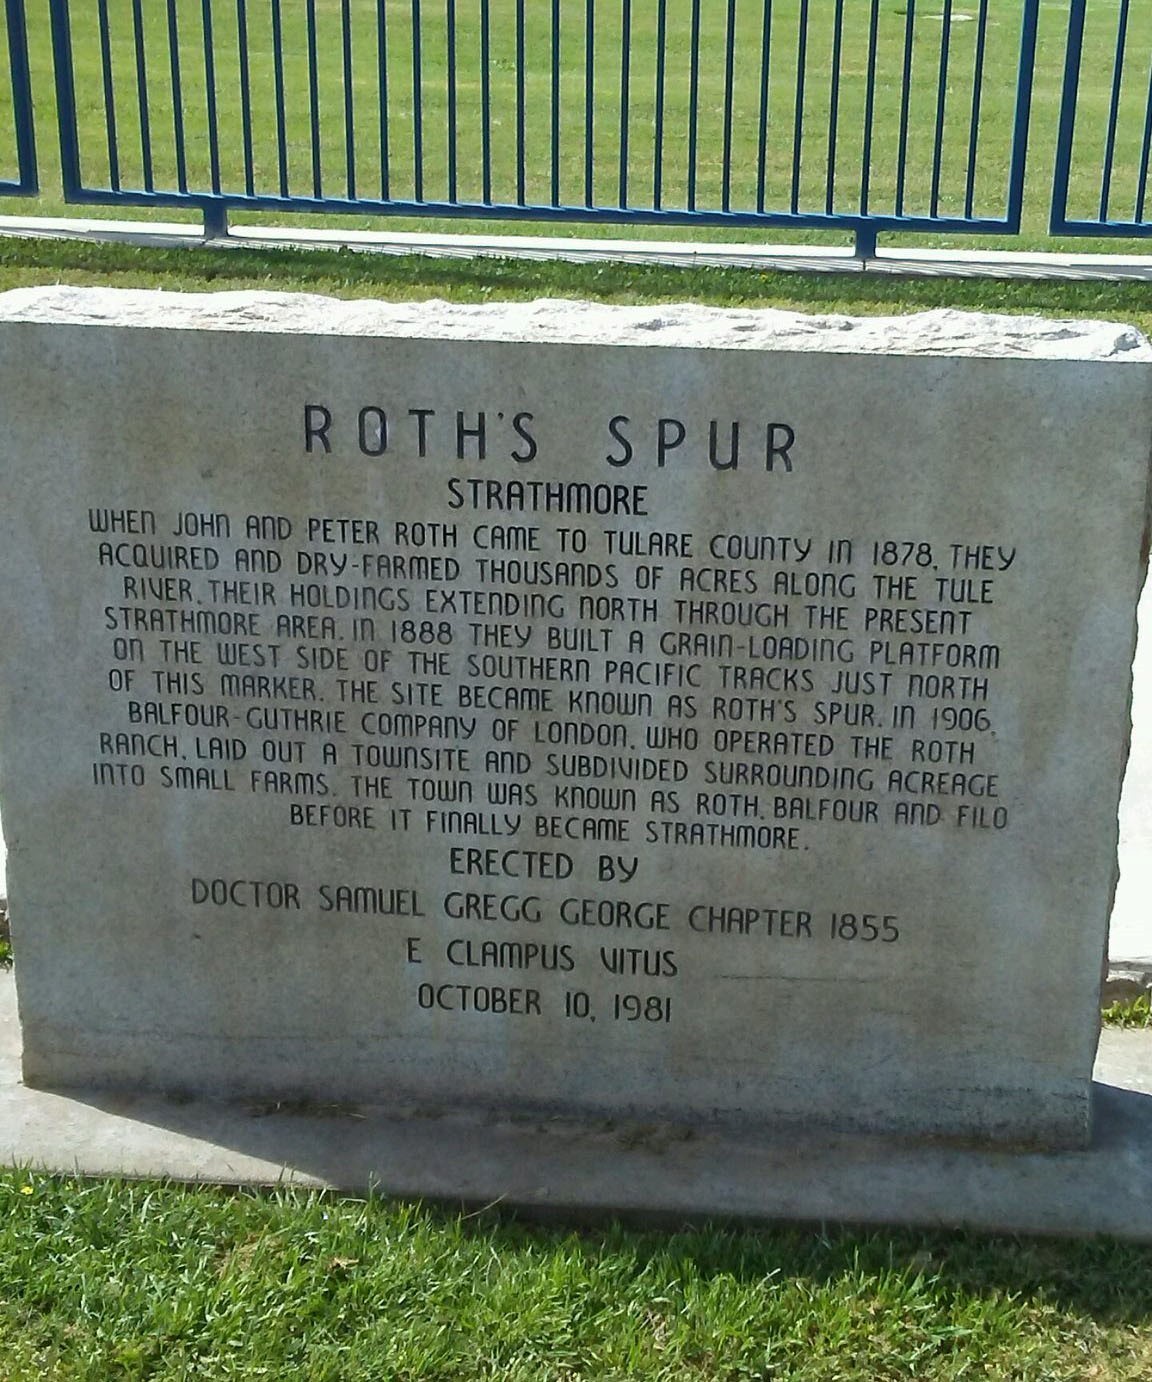 Roth's Spur